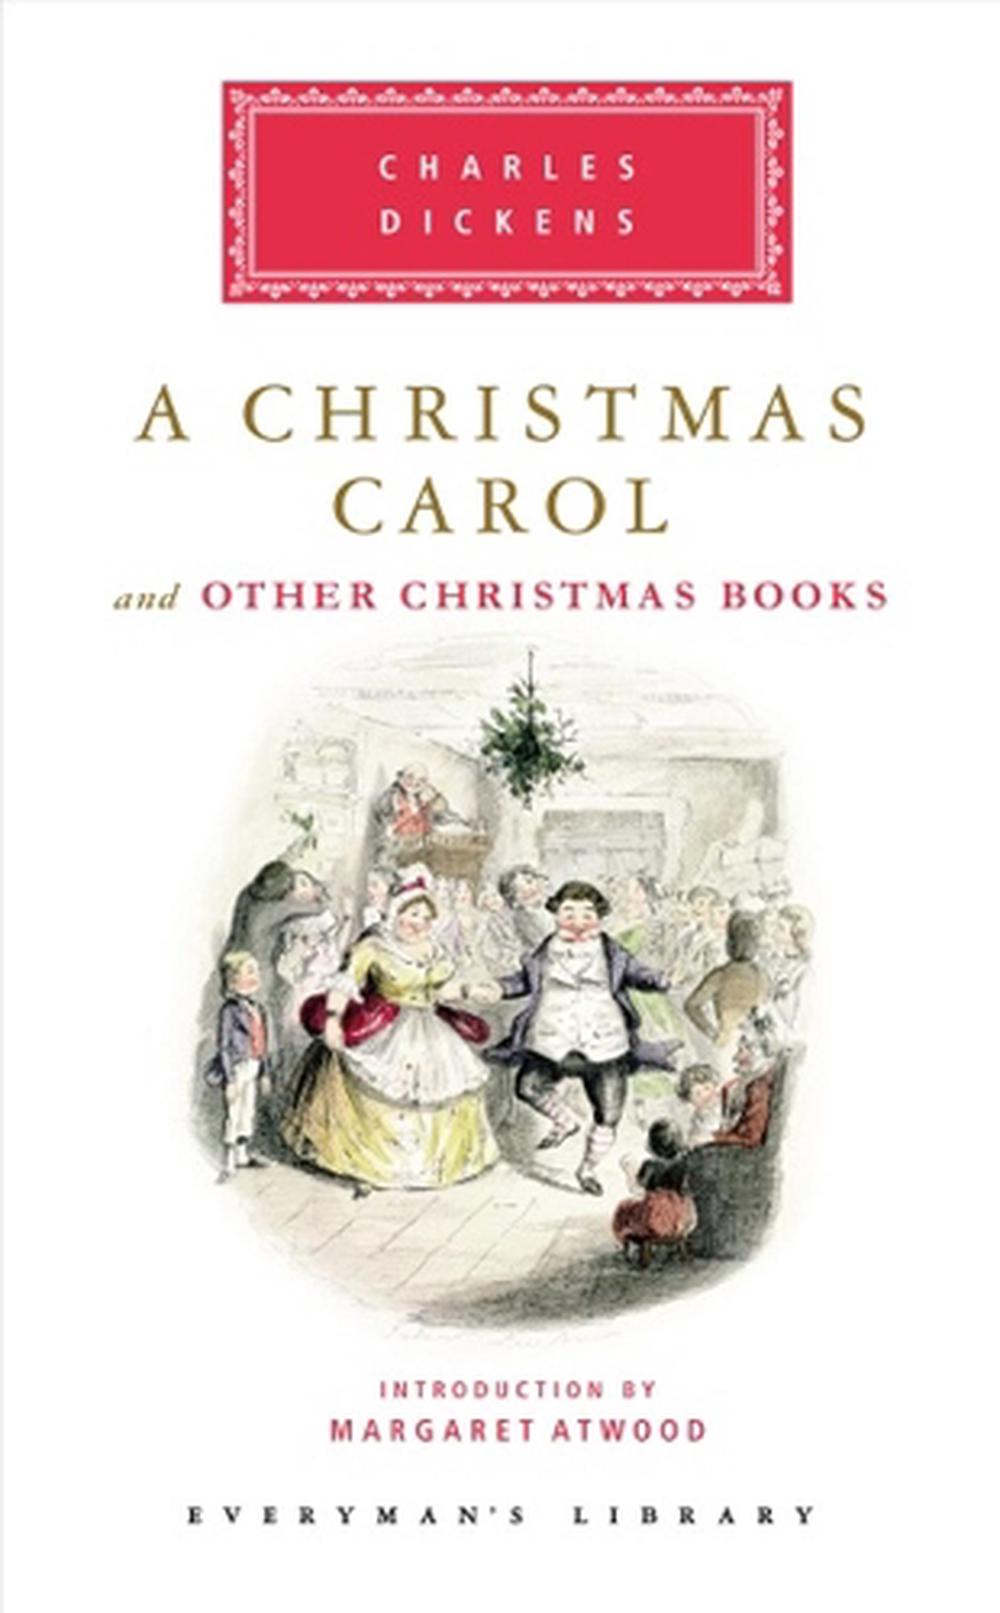 A Christmas Carol by Charles Dickens Hardcover Book Free Shipping! 9781841593234 | eBay